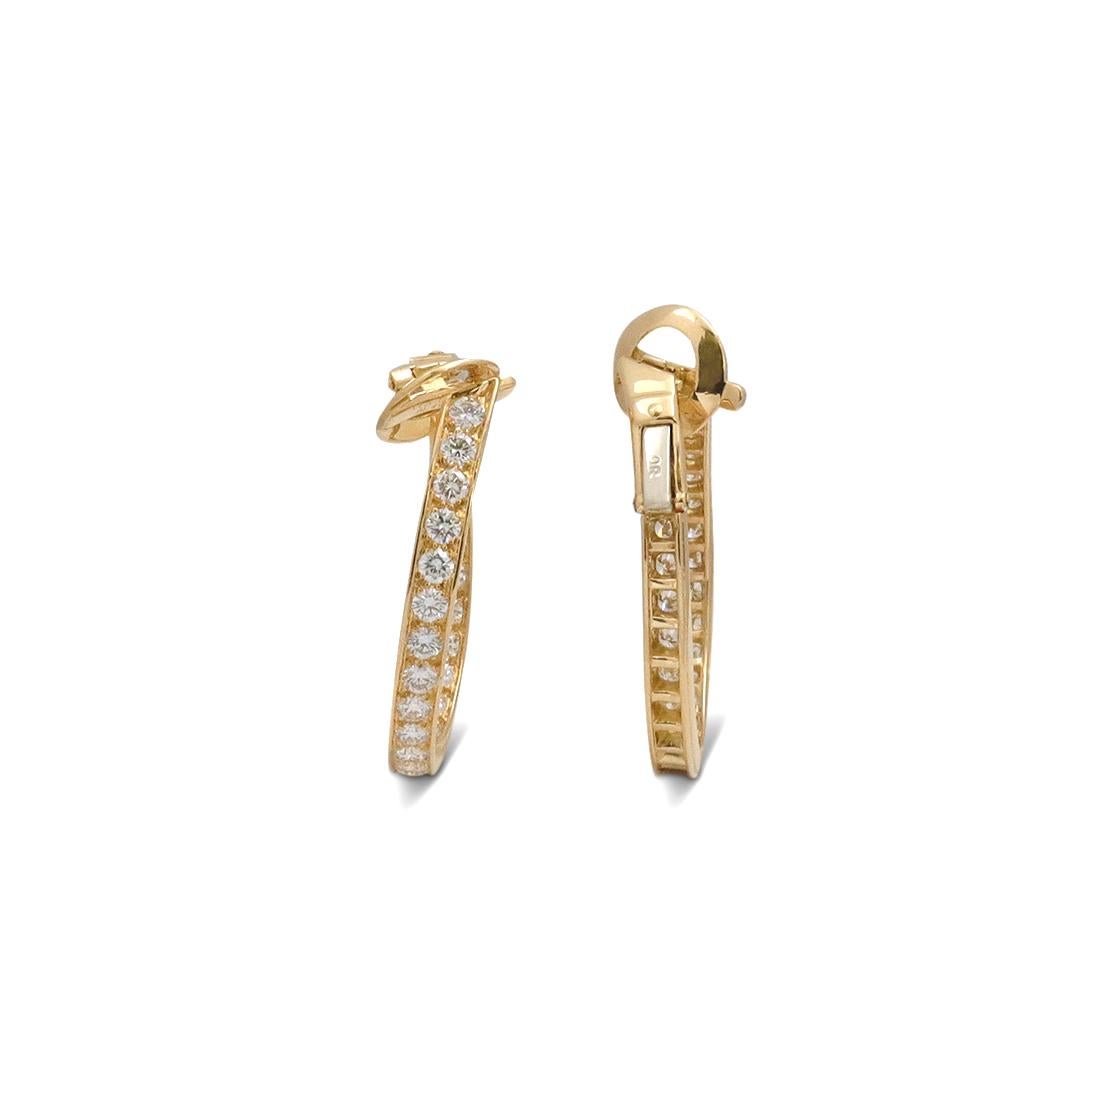 Authentic Van Cleef & Arpels hoop earrings crafted in 18 karat yellow gold. The twisted oval shaped earrings are set front to back with dazzling round brilliant cut diamonds weighing an estimated 5.50 carats total (G-H color, VS clarity). The